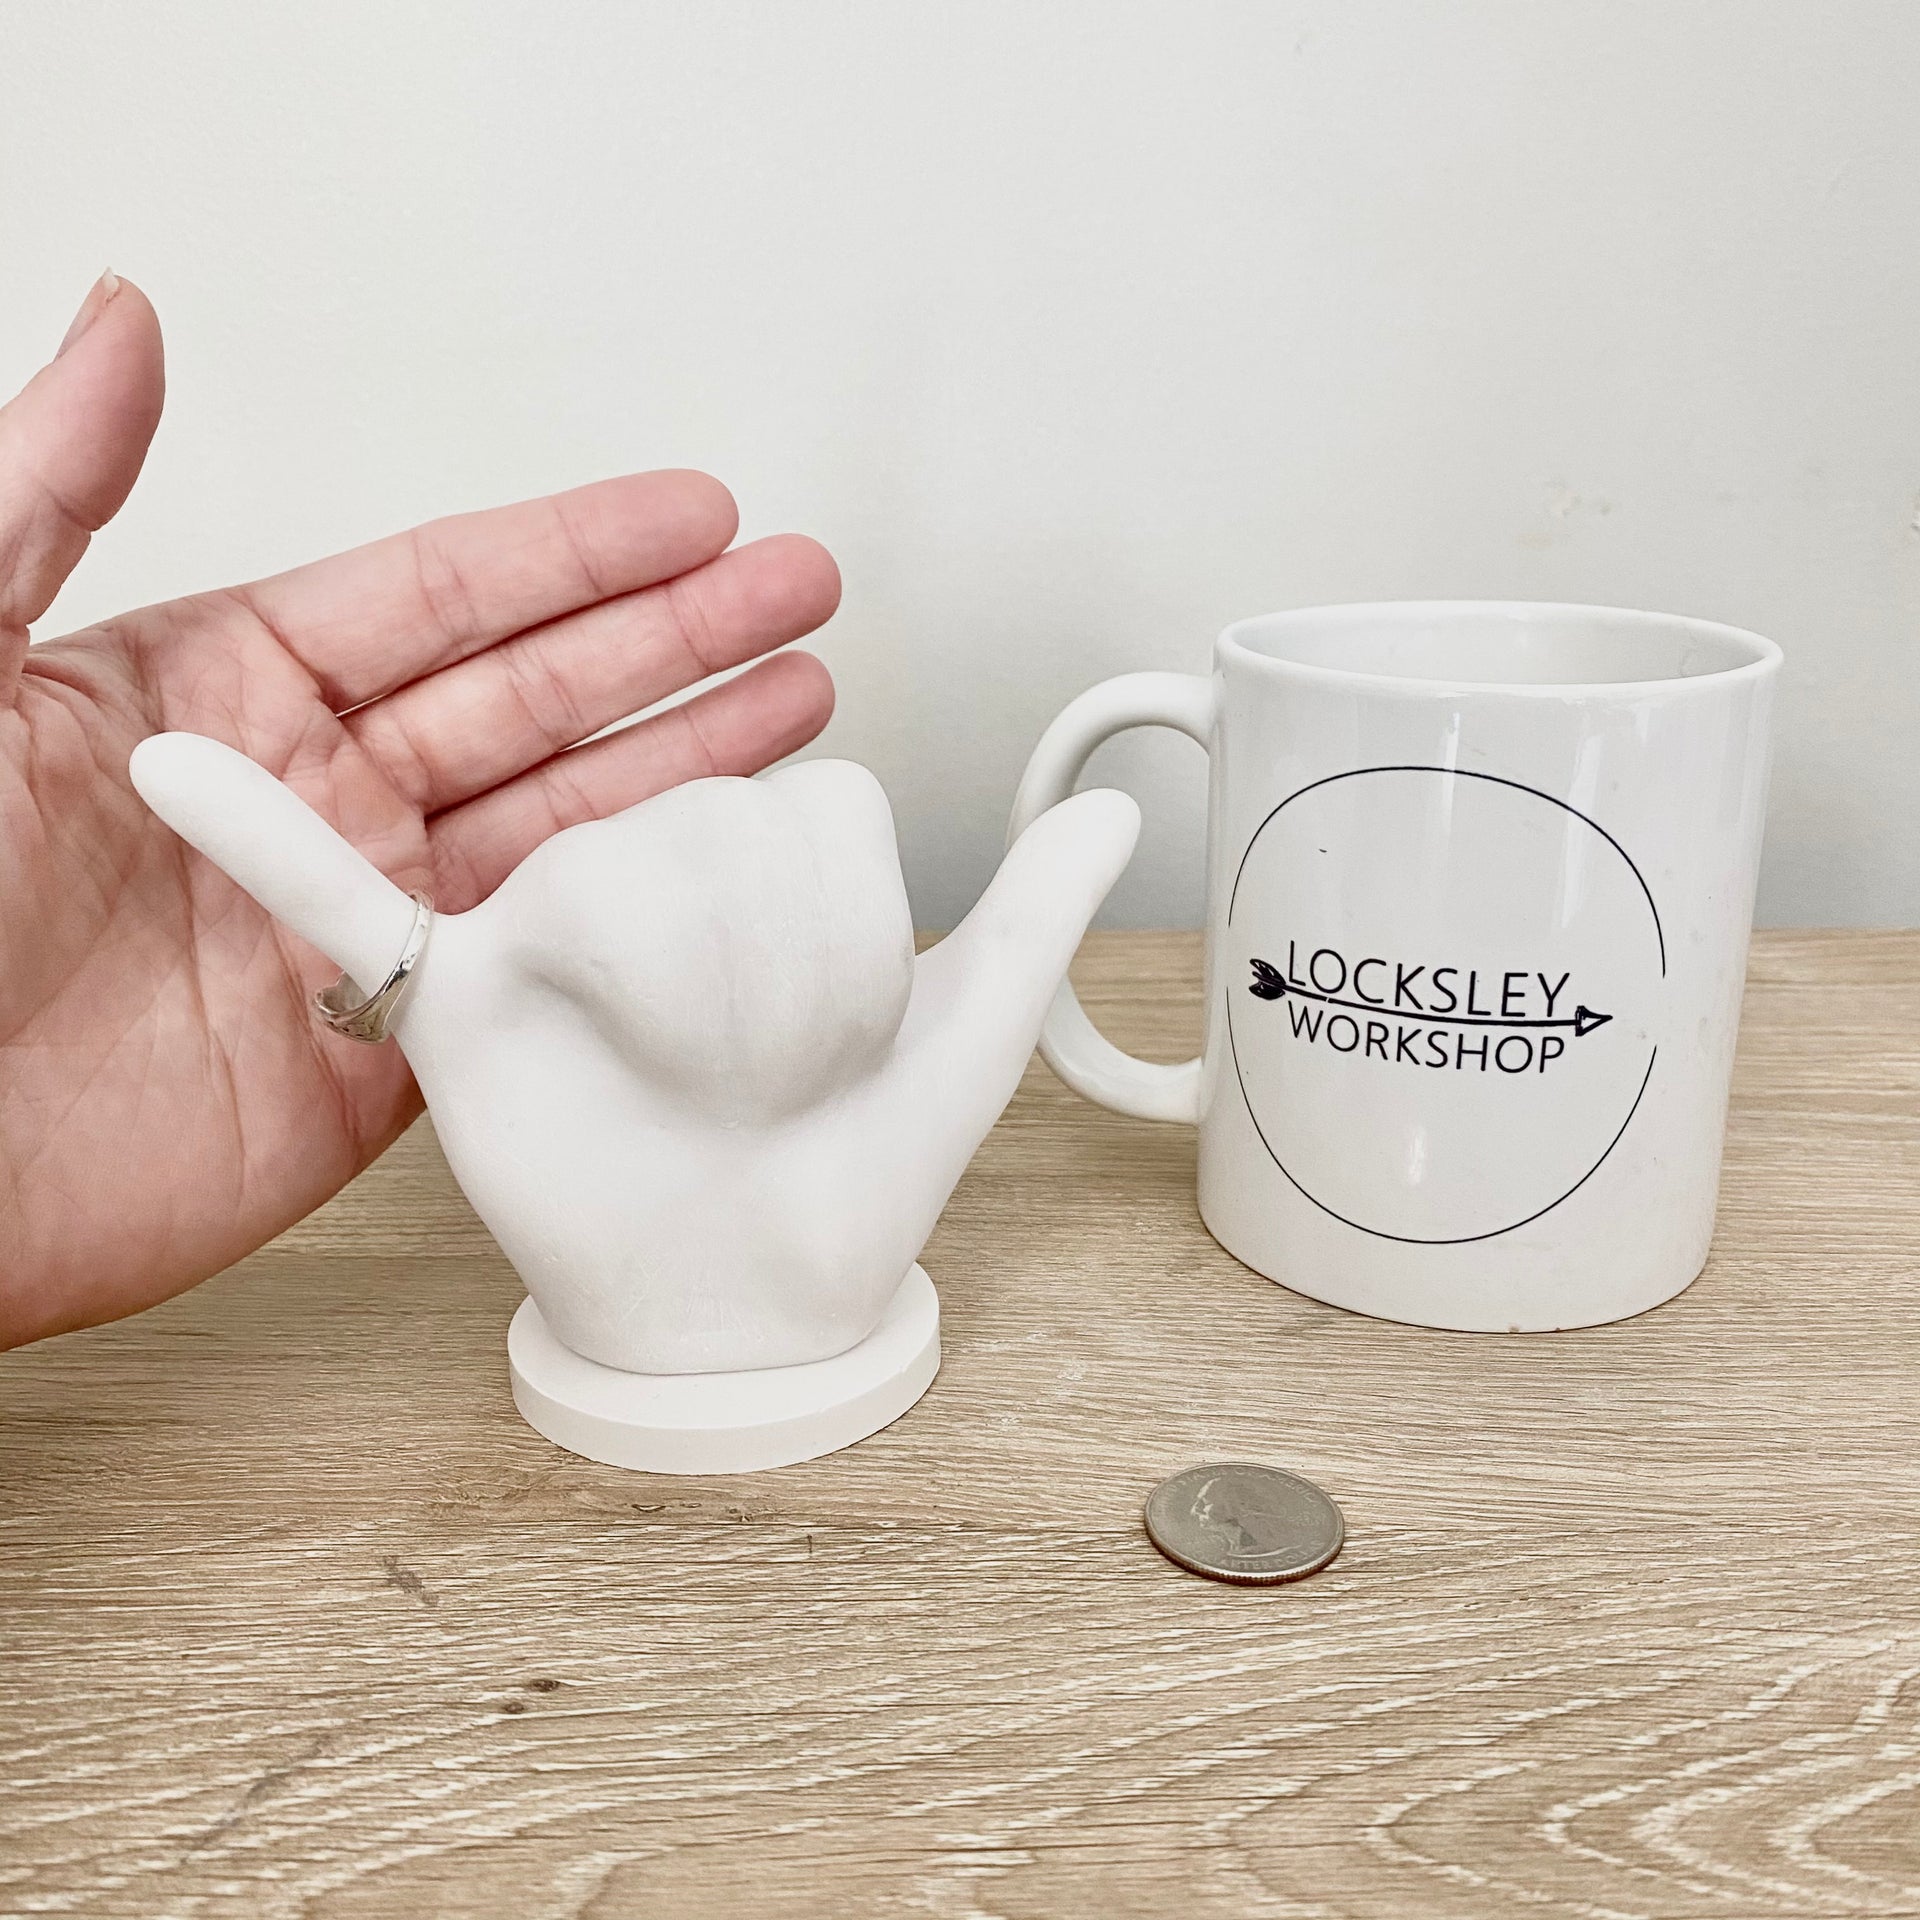 Size comparison for ring holder. Hand, mug, and quarter included for reference.